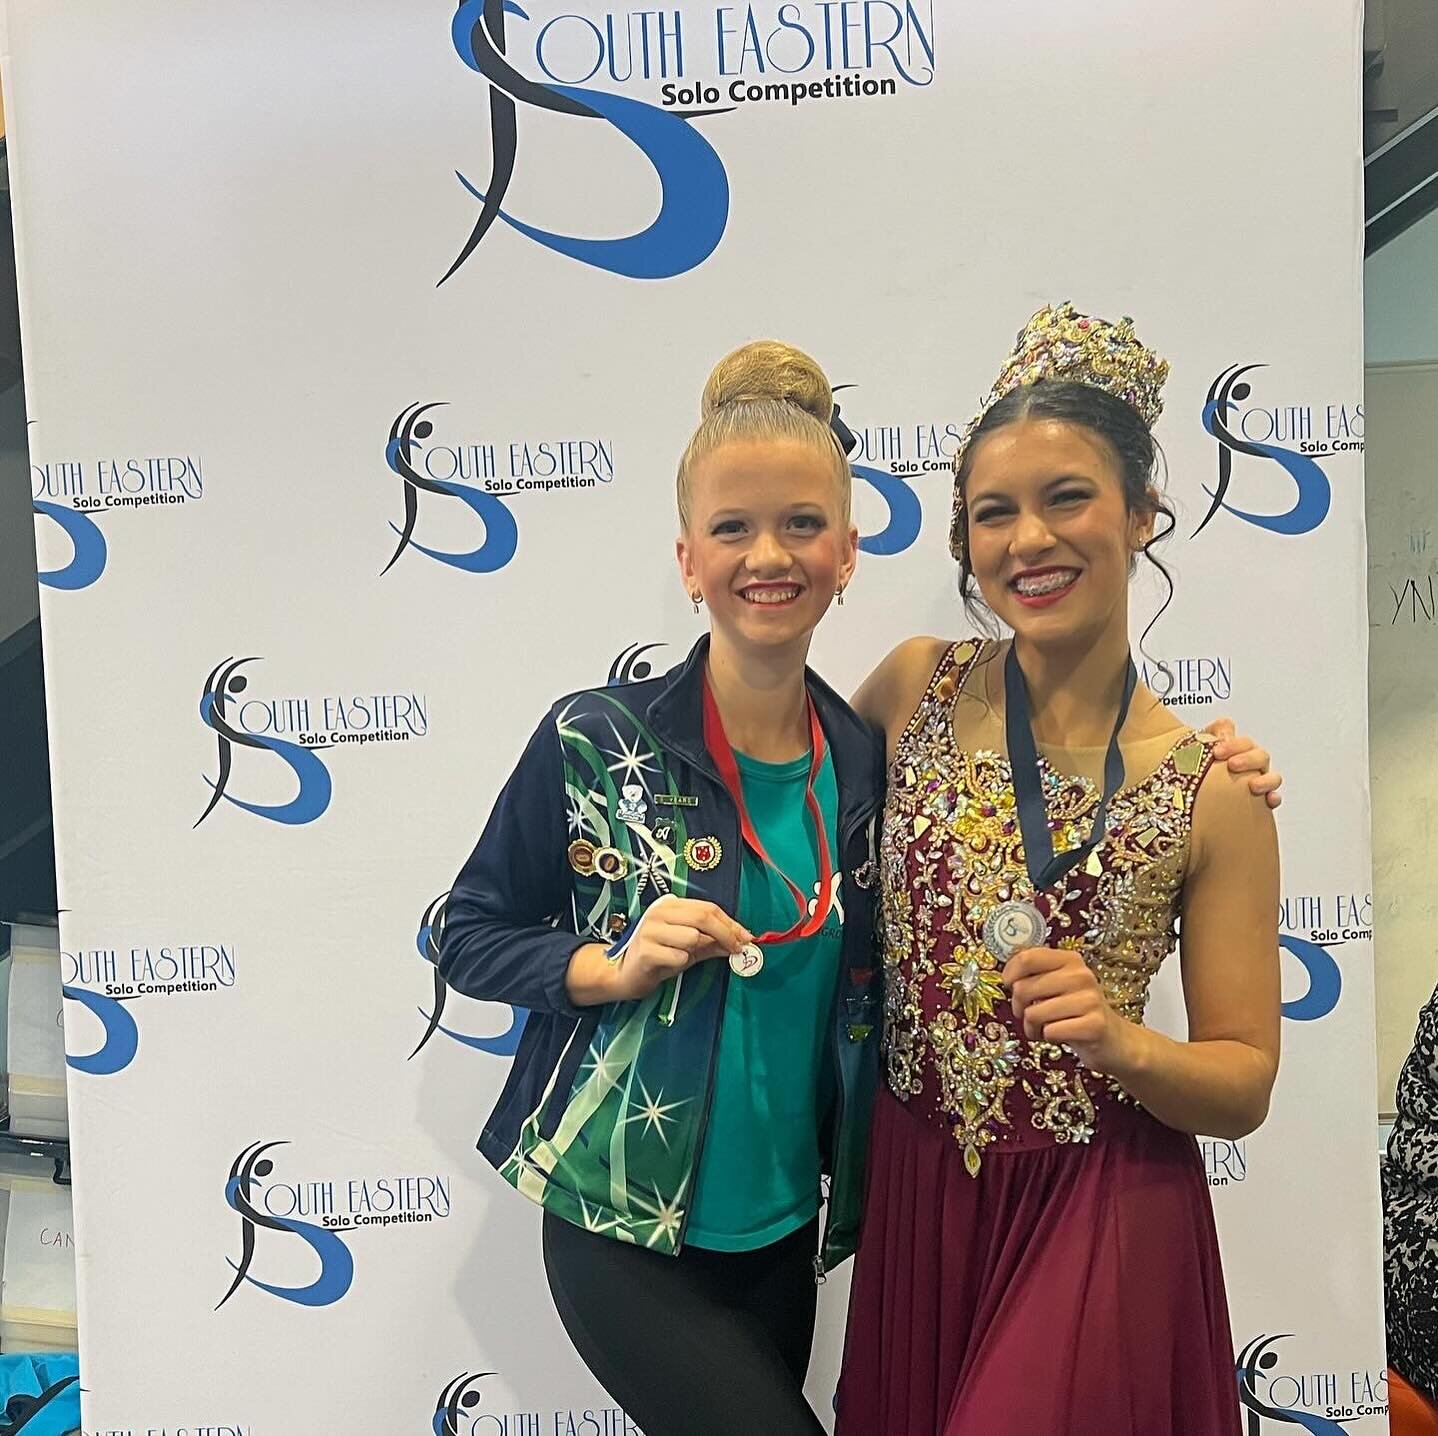 And we say goodbye to weekend 2 of solo competitions!

Congratulations to all our girls who took to the stage this weekend. We are so proud of all of you 💙🤍💚

Congratulations to the girls who had their numbers called out!
🌟 Alana - 14 Years Cali 